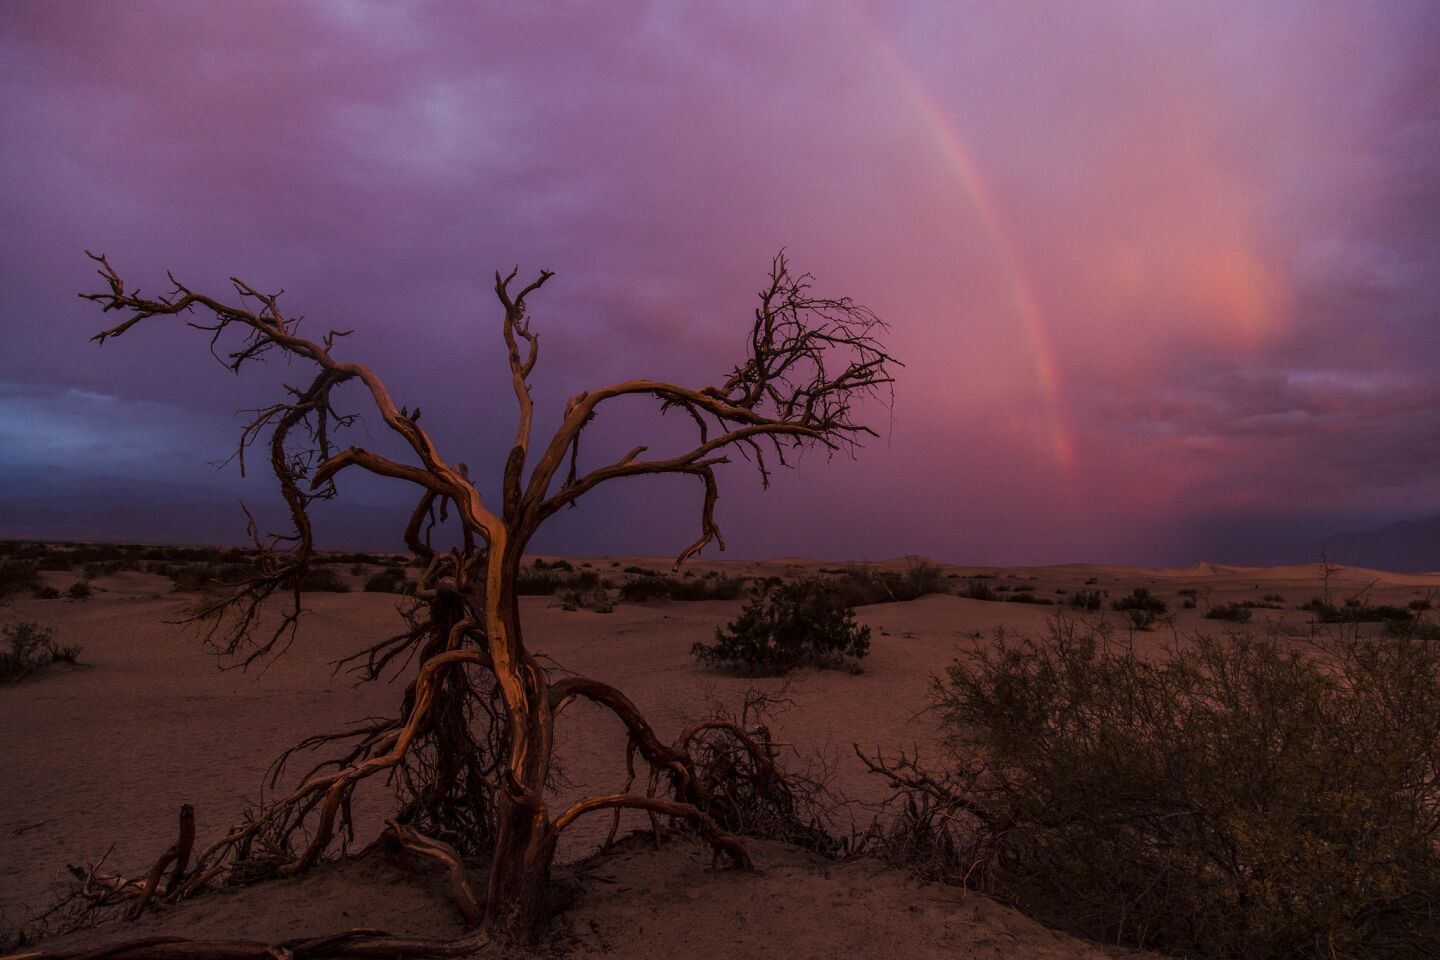 A rainbow forms during a rare stormy sunrise at Mesquite Flat Sand Dunes. Read the story: There's weird science, quirky history, plain fun in the 3.4 million acres of Death Valley National Park